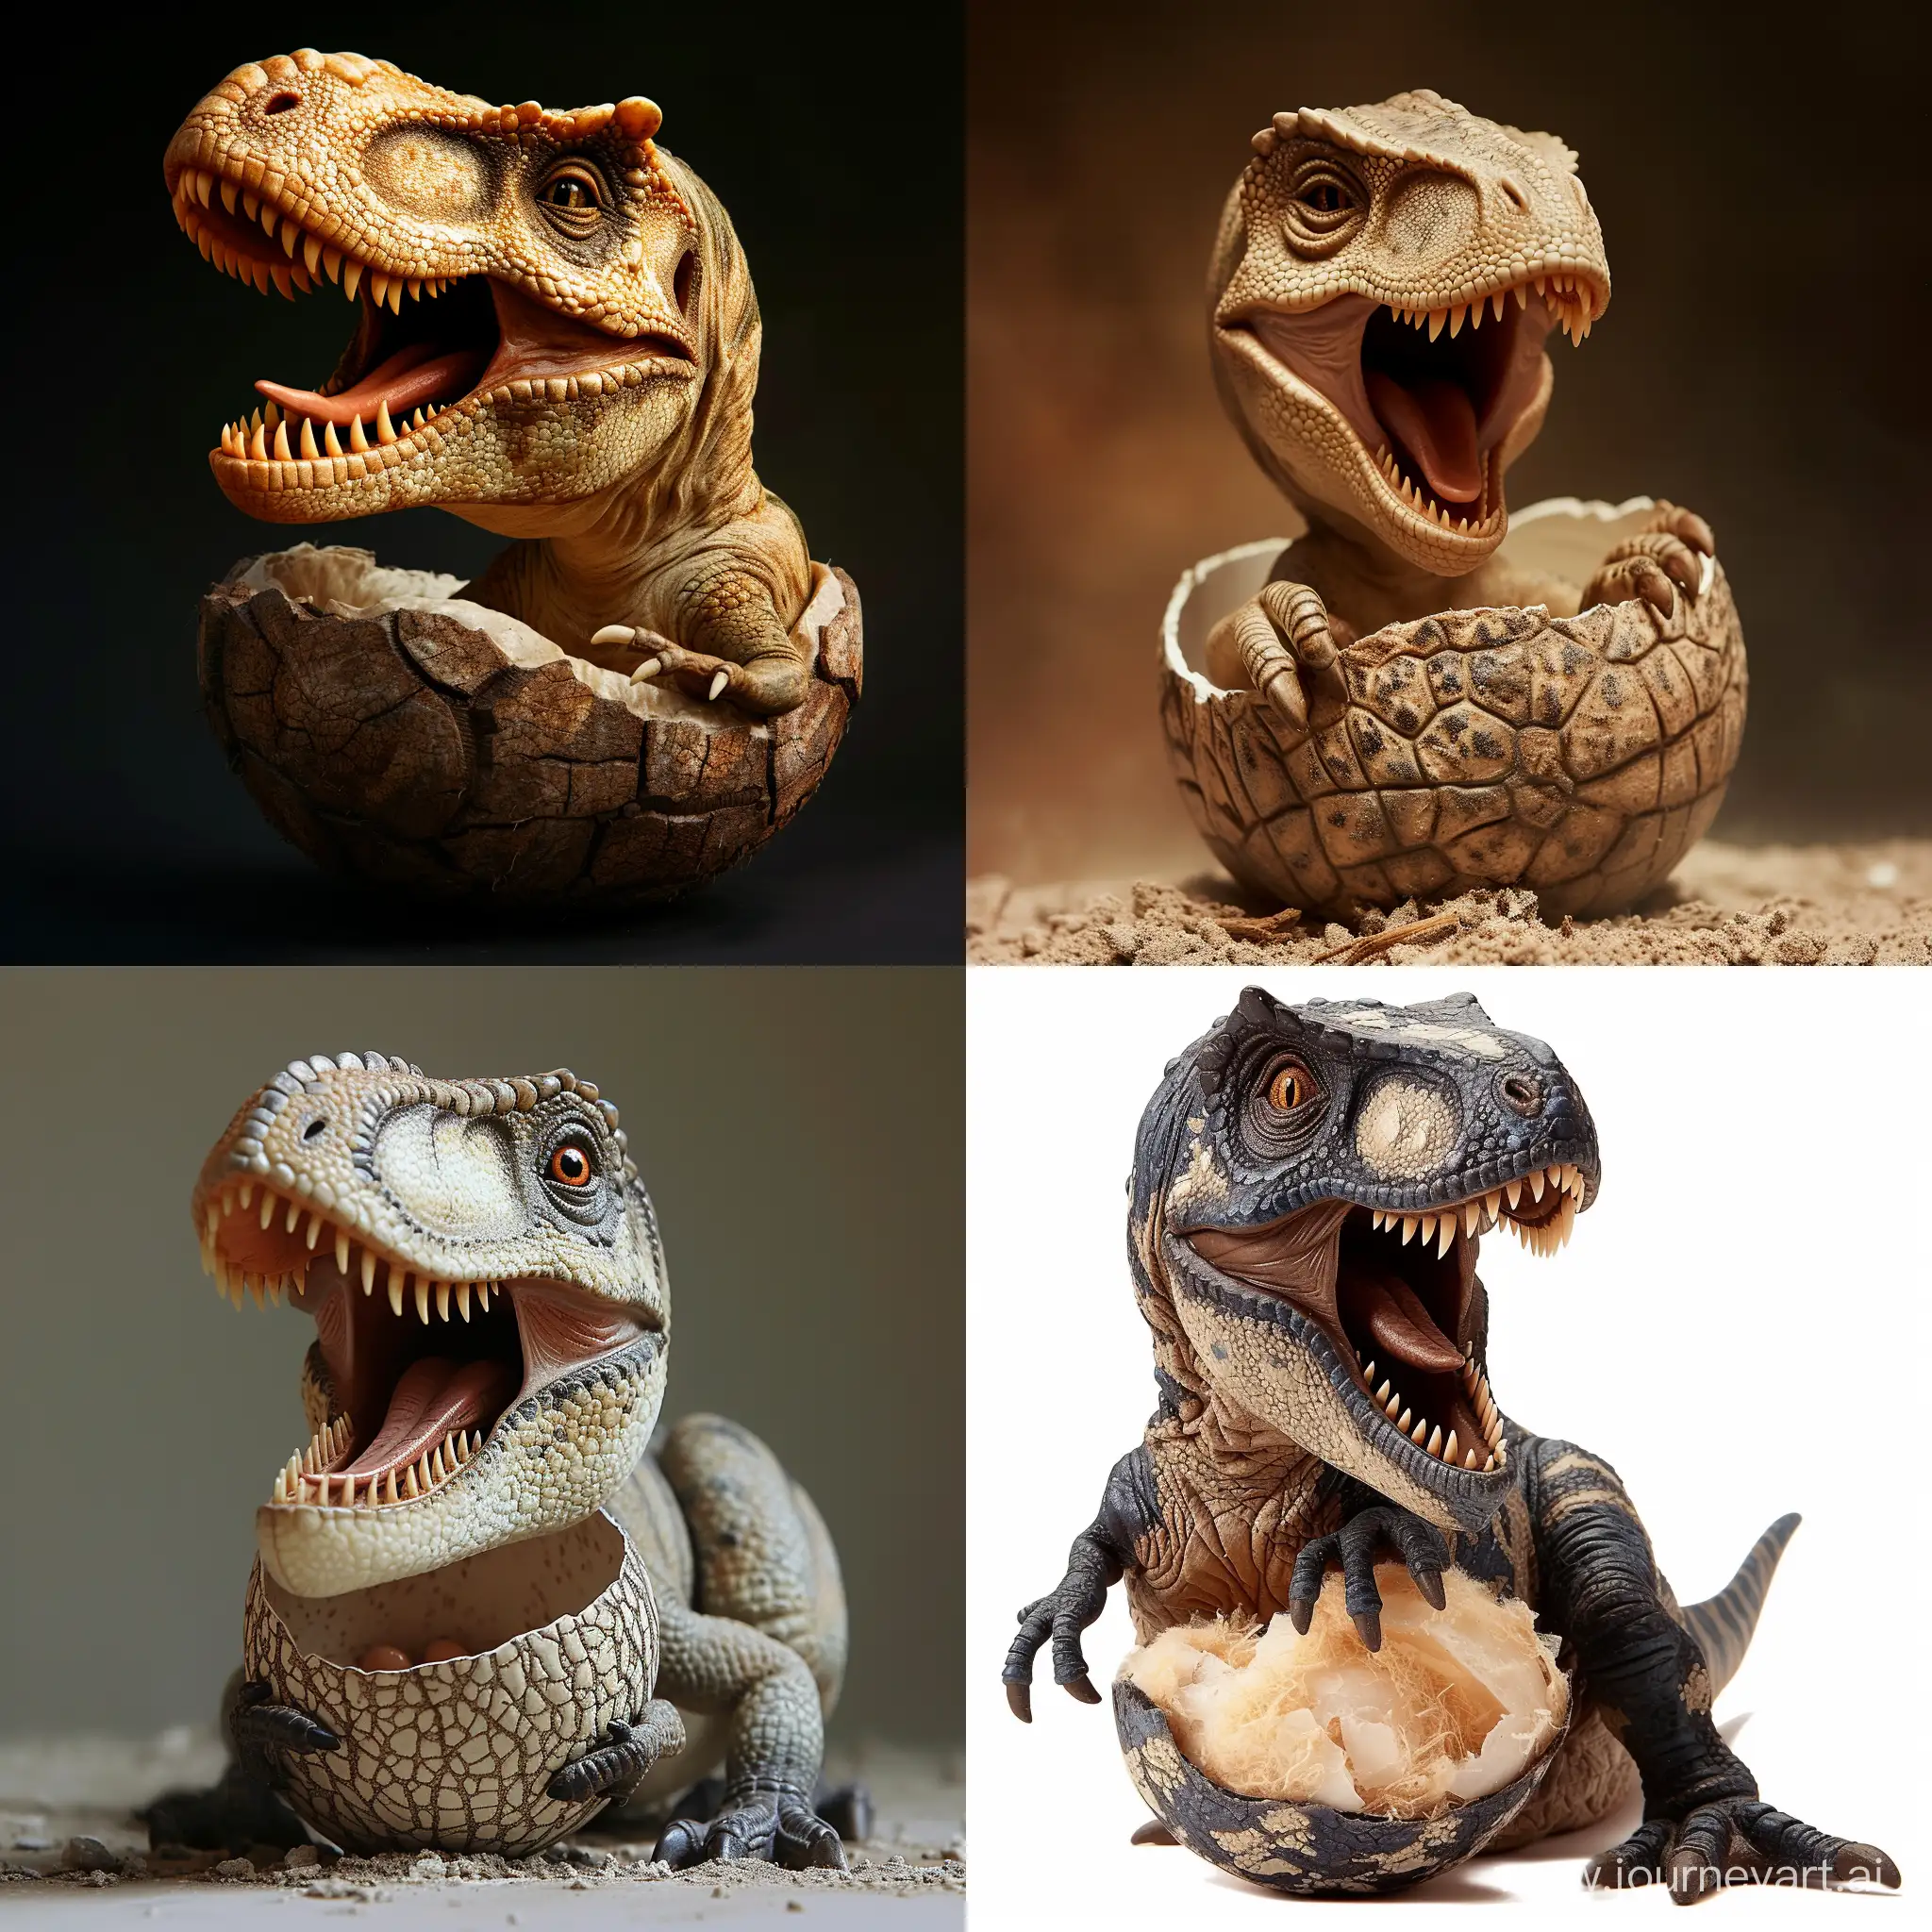 A baby dinosaur hatching and laughing - no background and completely realistic with high detail